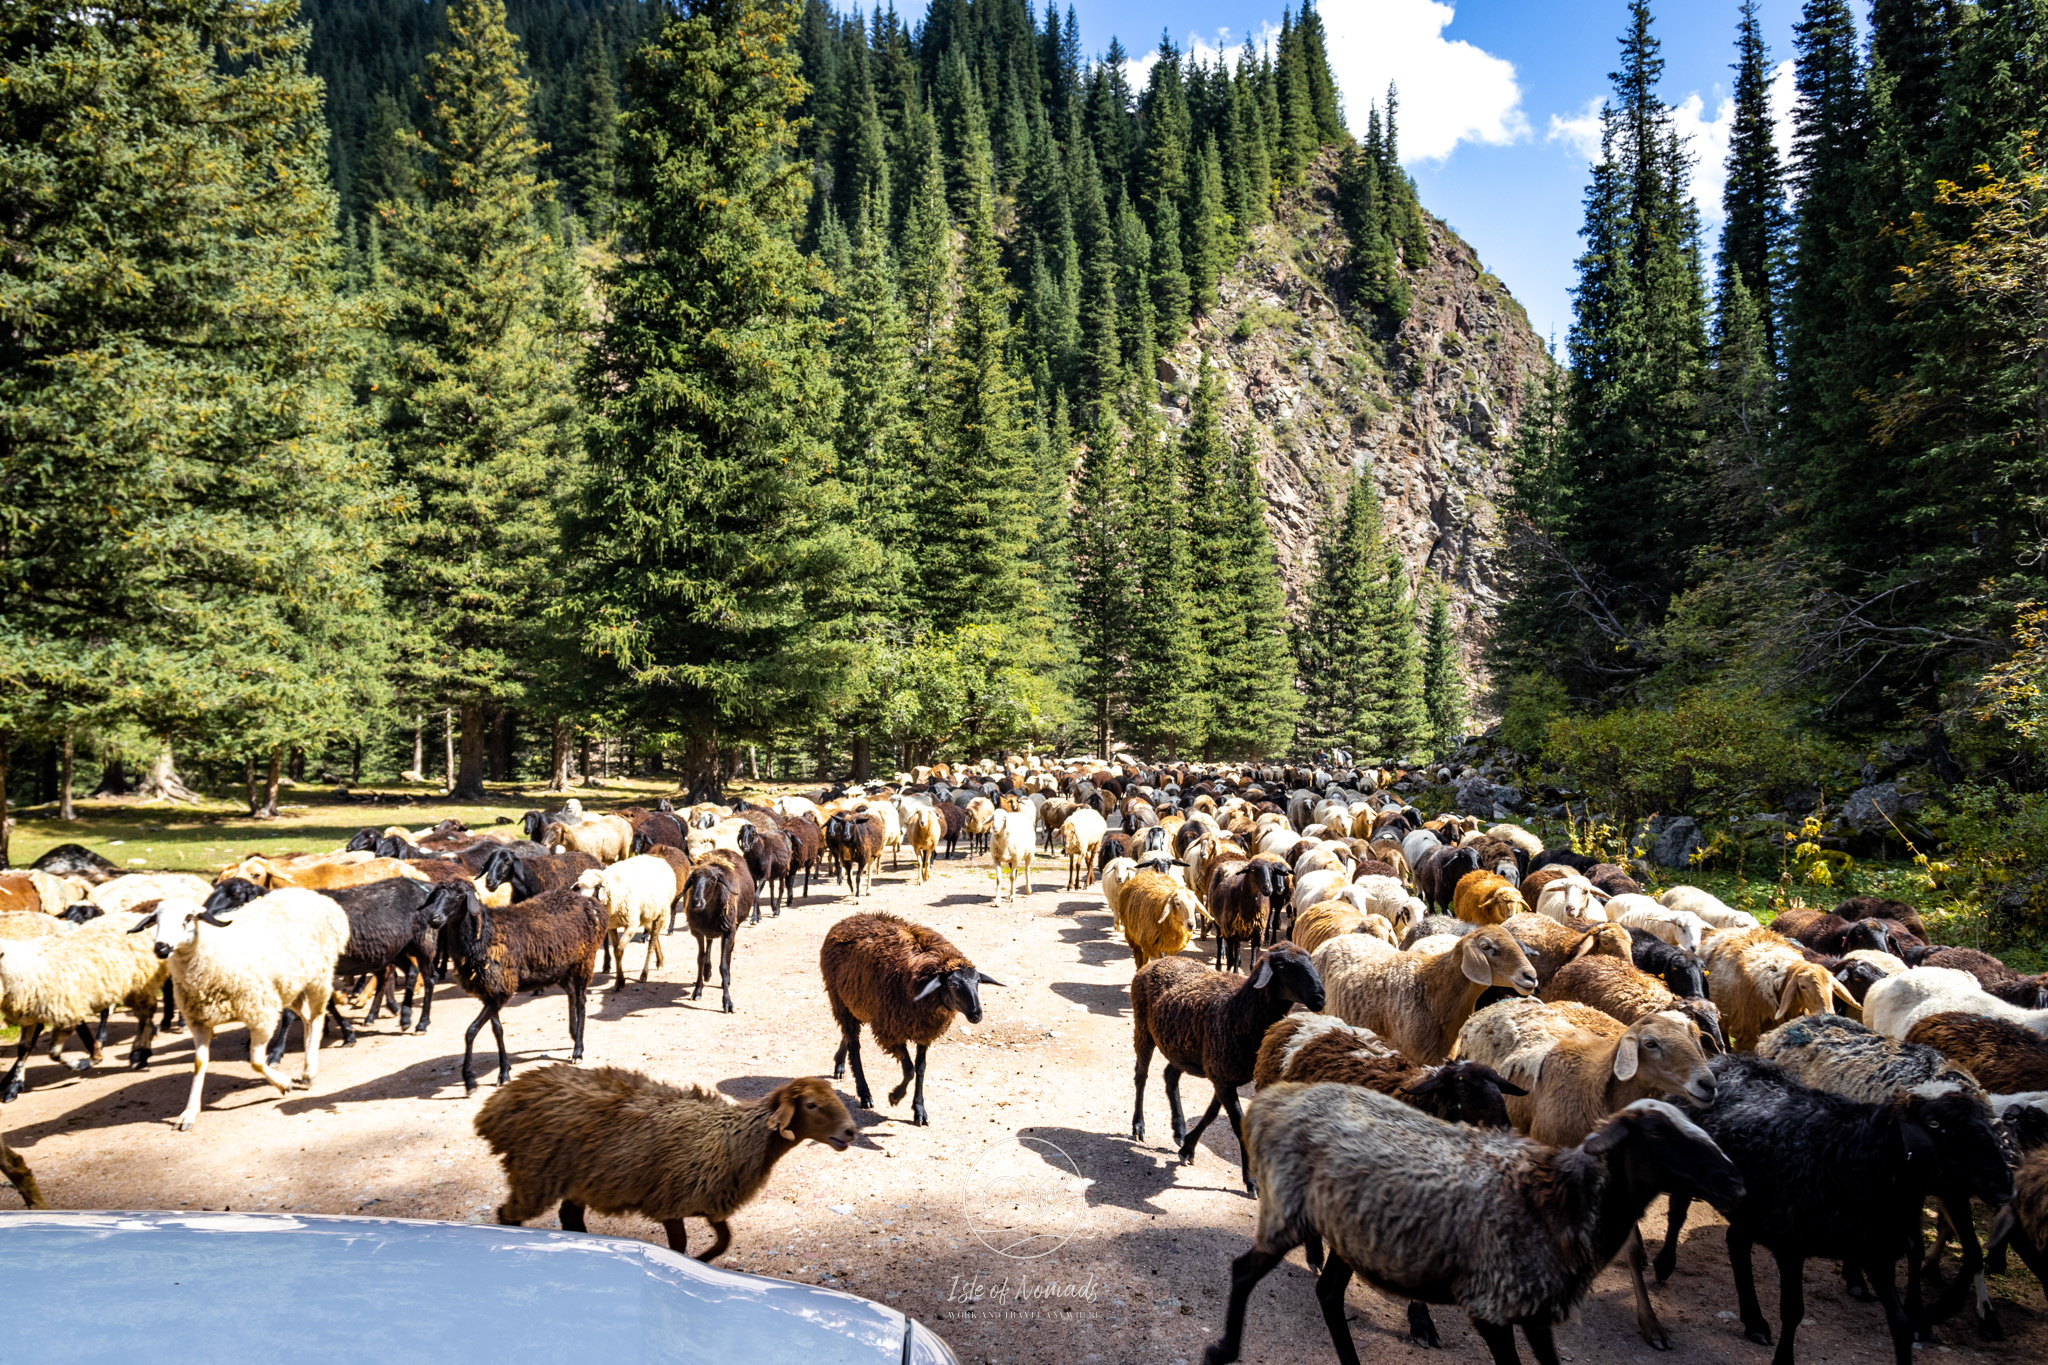 Traffic jam in the Sary Jaz Valley